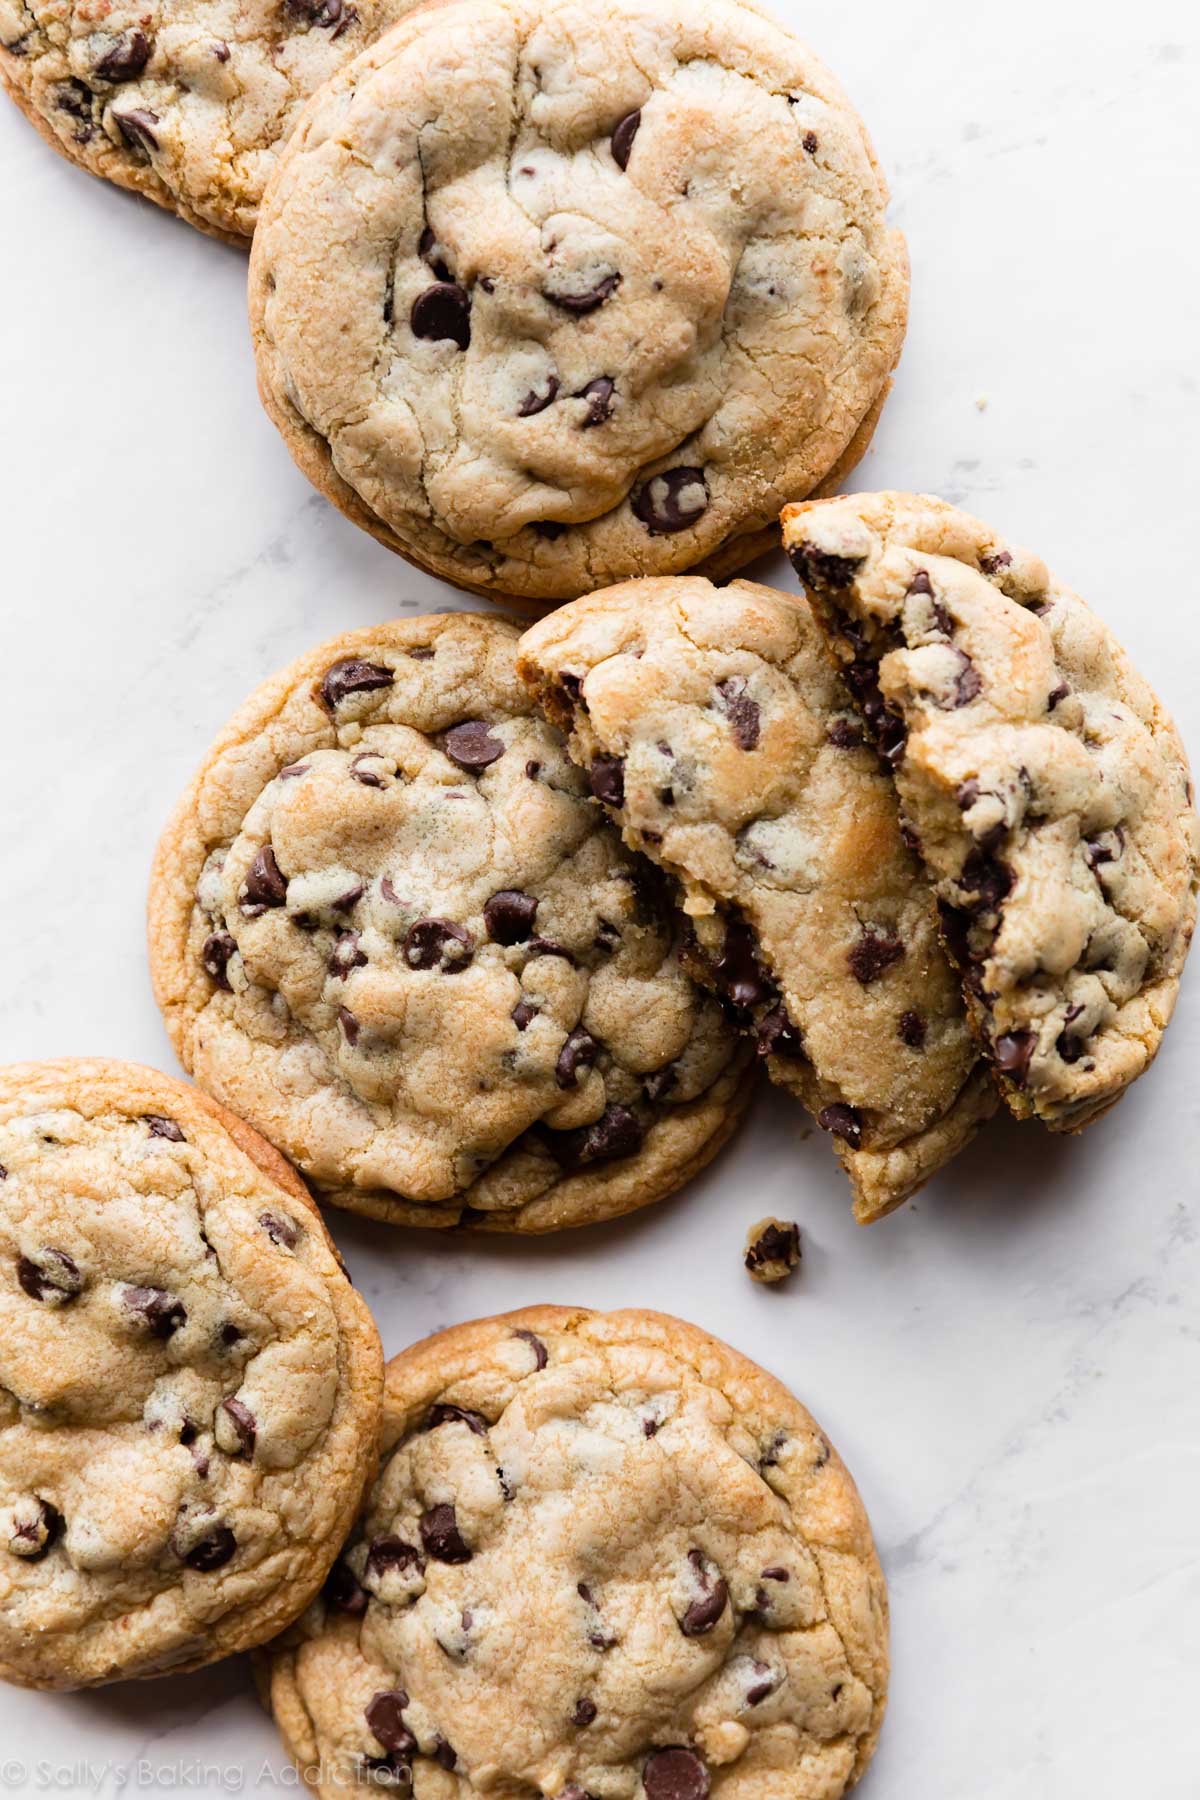 6 giant chocolate chip cookies